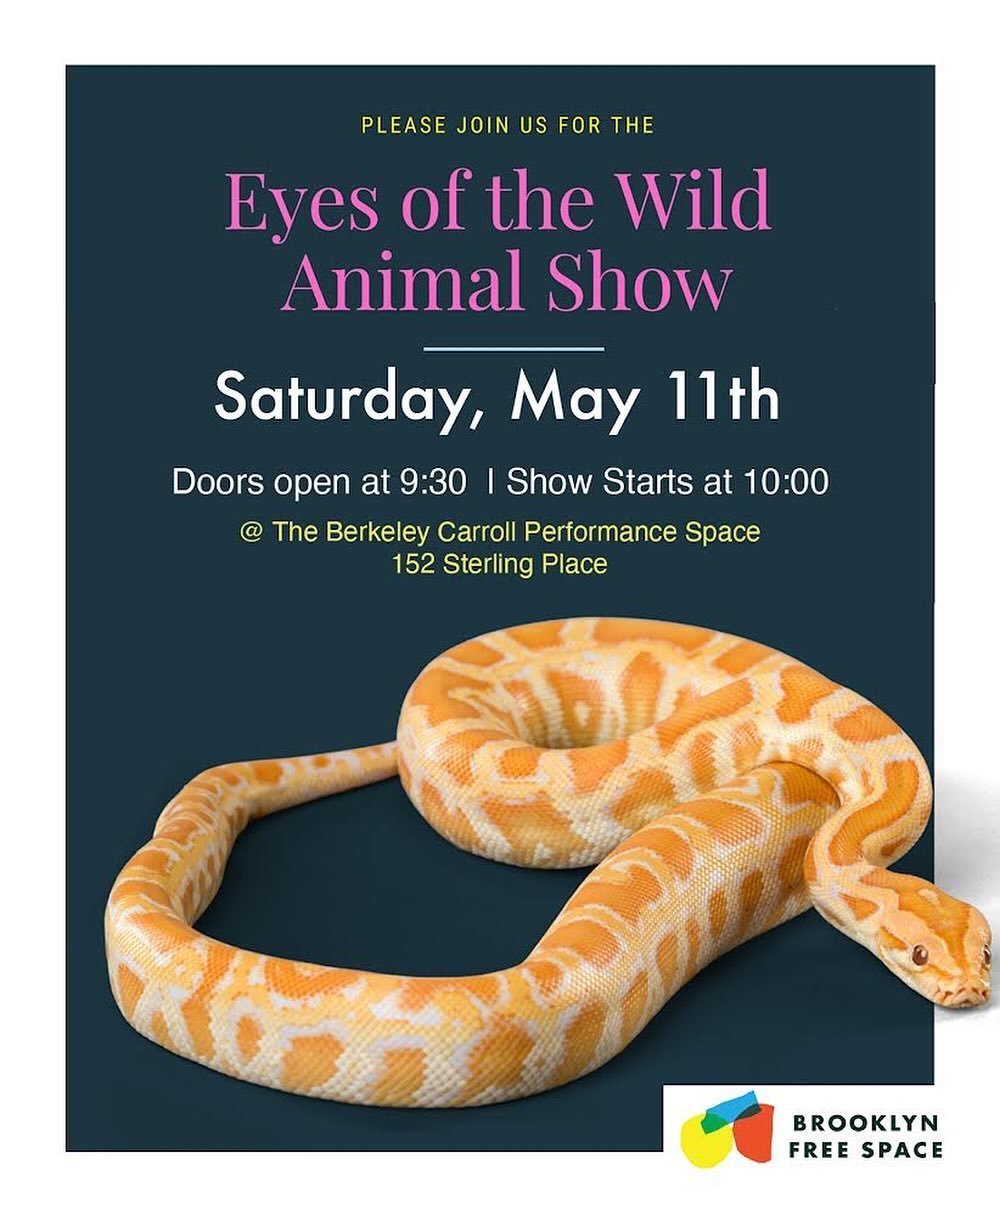 Hedgehogs and armadillos and snakes, oh my! Get into the wild without leaving Brooklyn. 

Join us for Brooklyn Free Space&rsquo;s annual Animal Show, showcasing exotic creatures courtesy of Eyes of the Wild! Secure your spot by prepaying through Venm